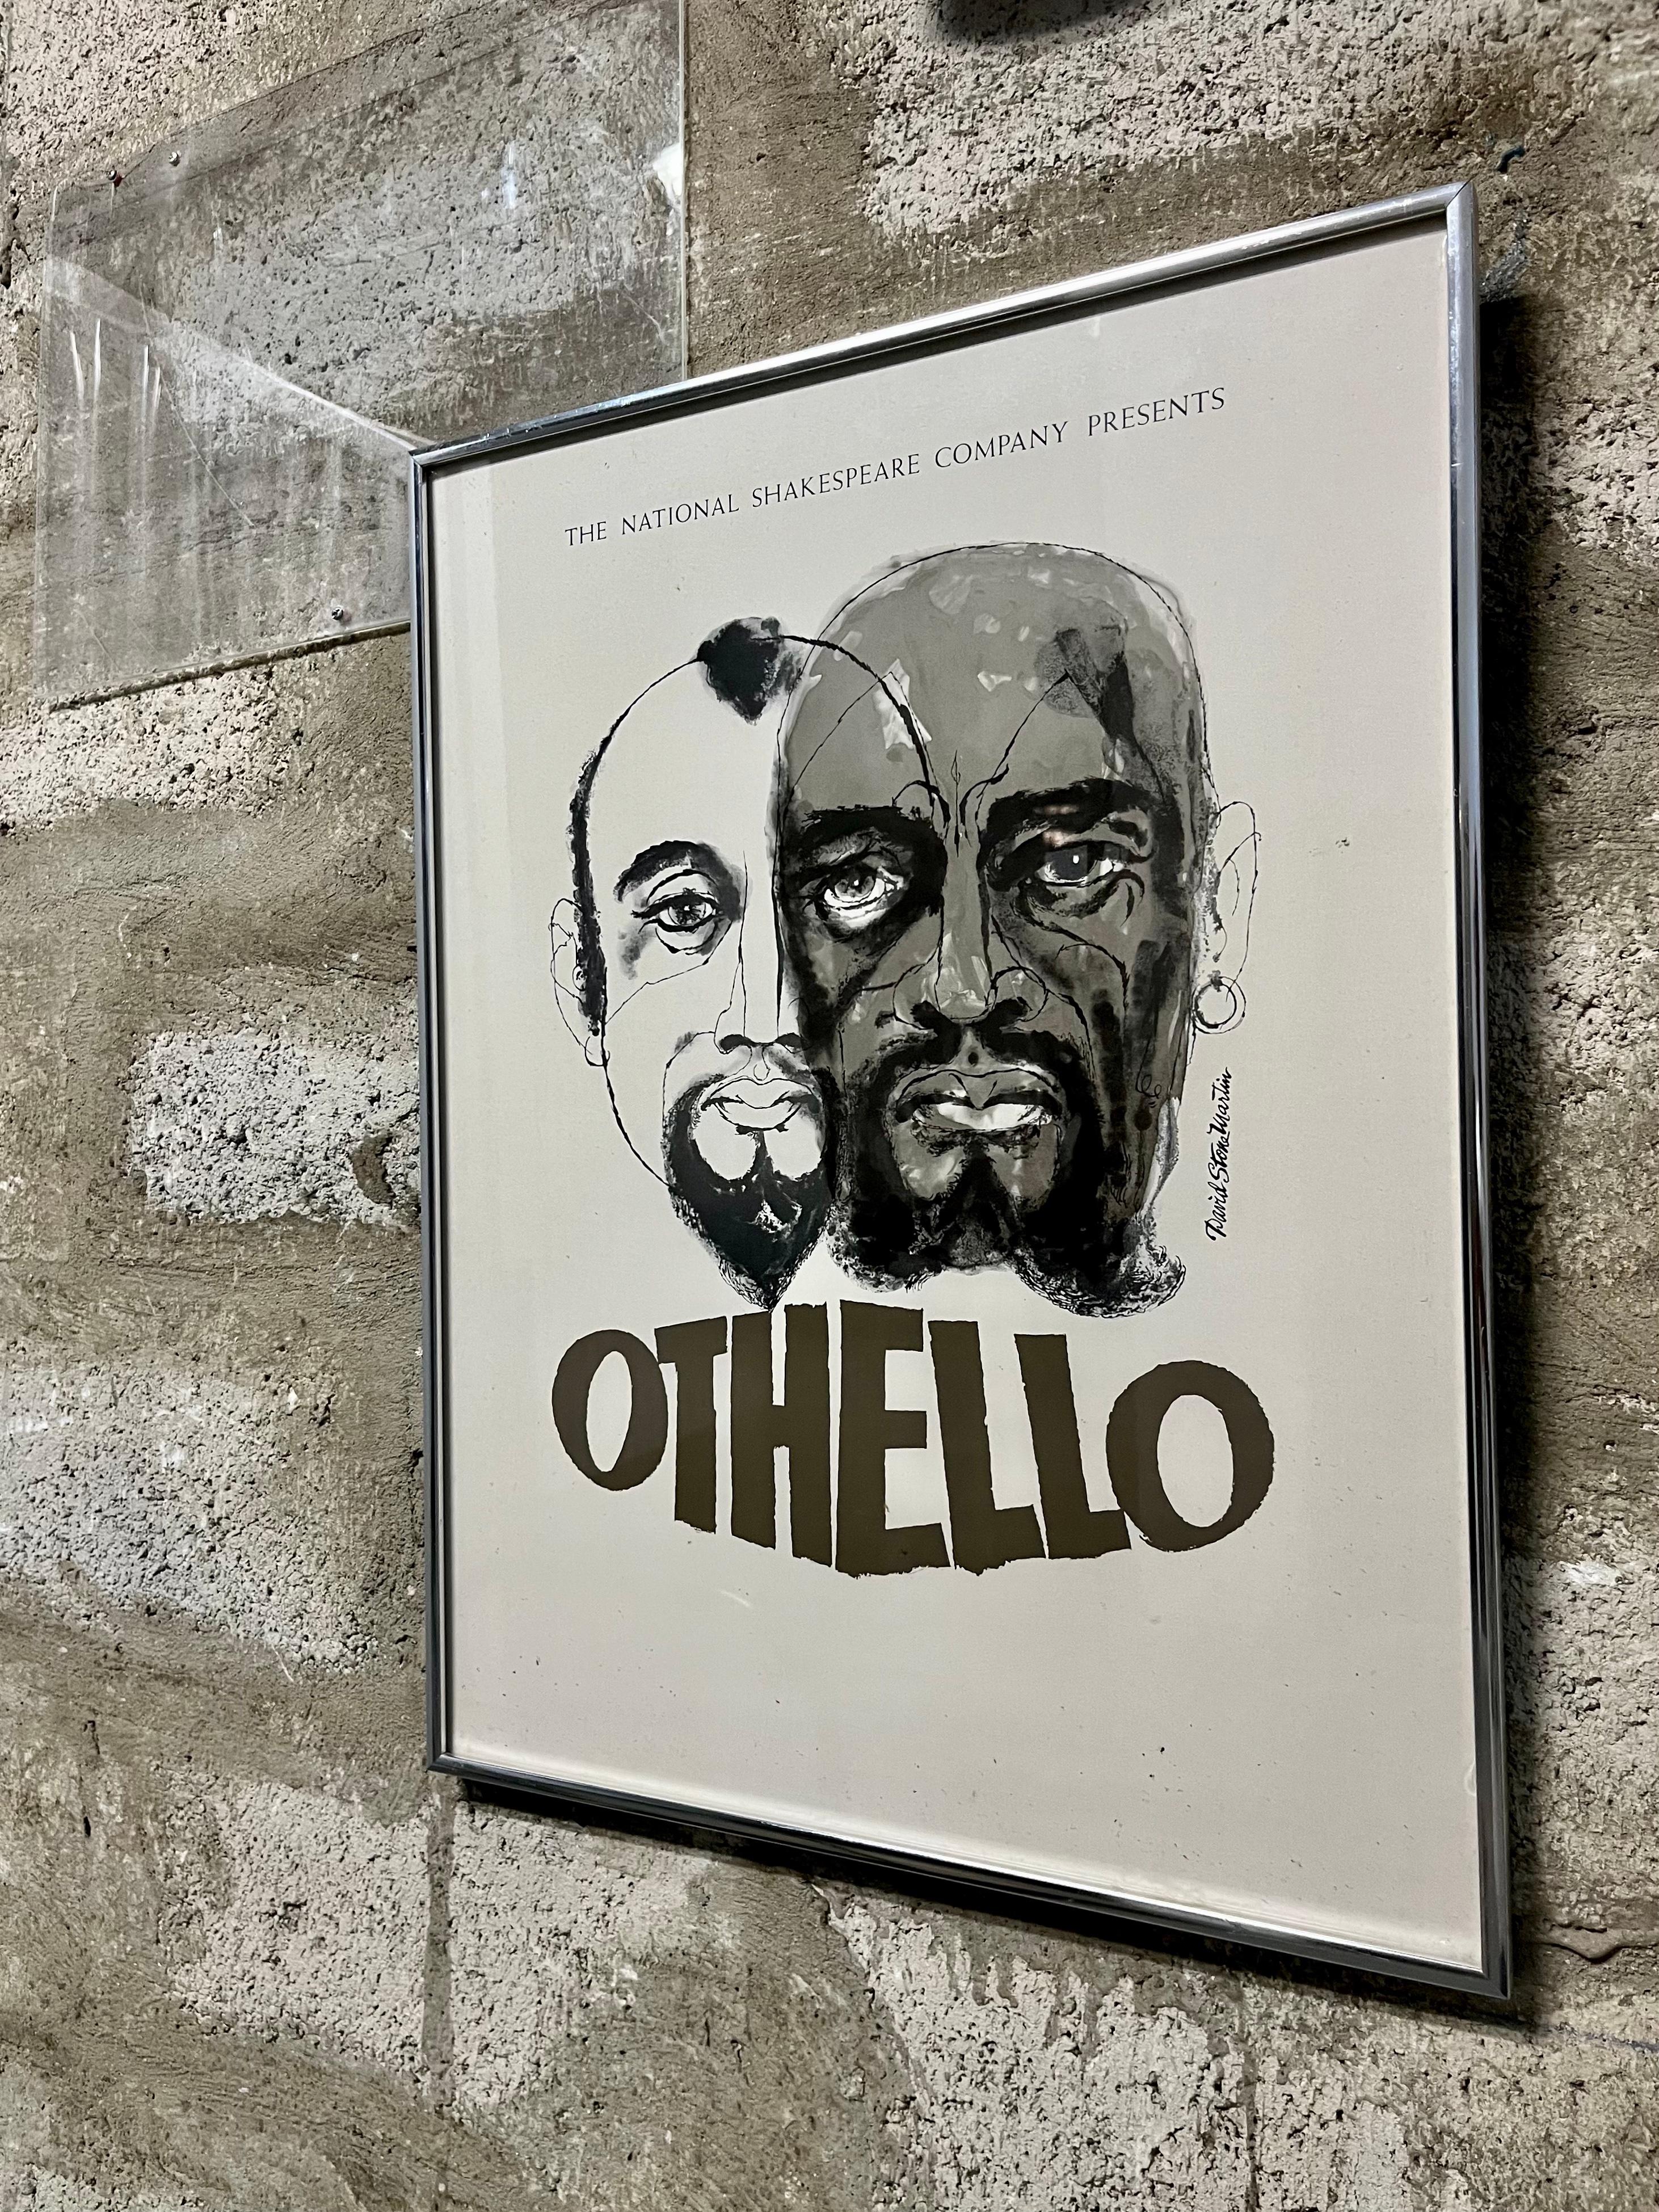 American Vintage The National Shakespeare Company Presents-Othello Framed Poster. C 1970s For Sale